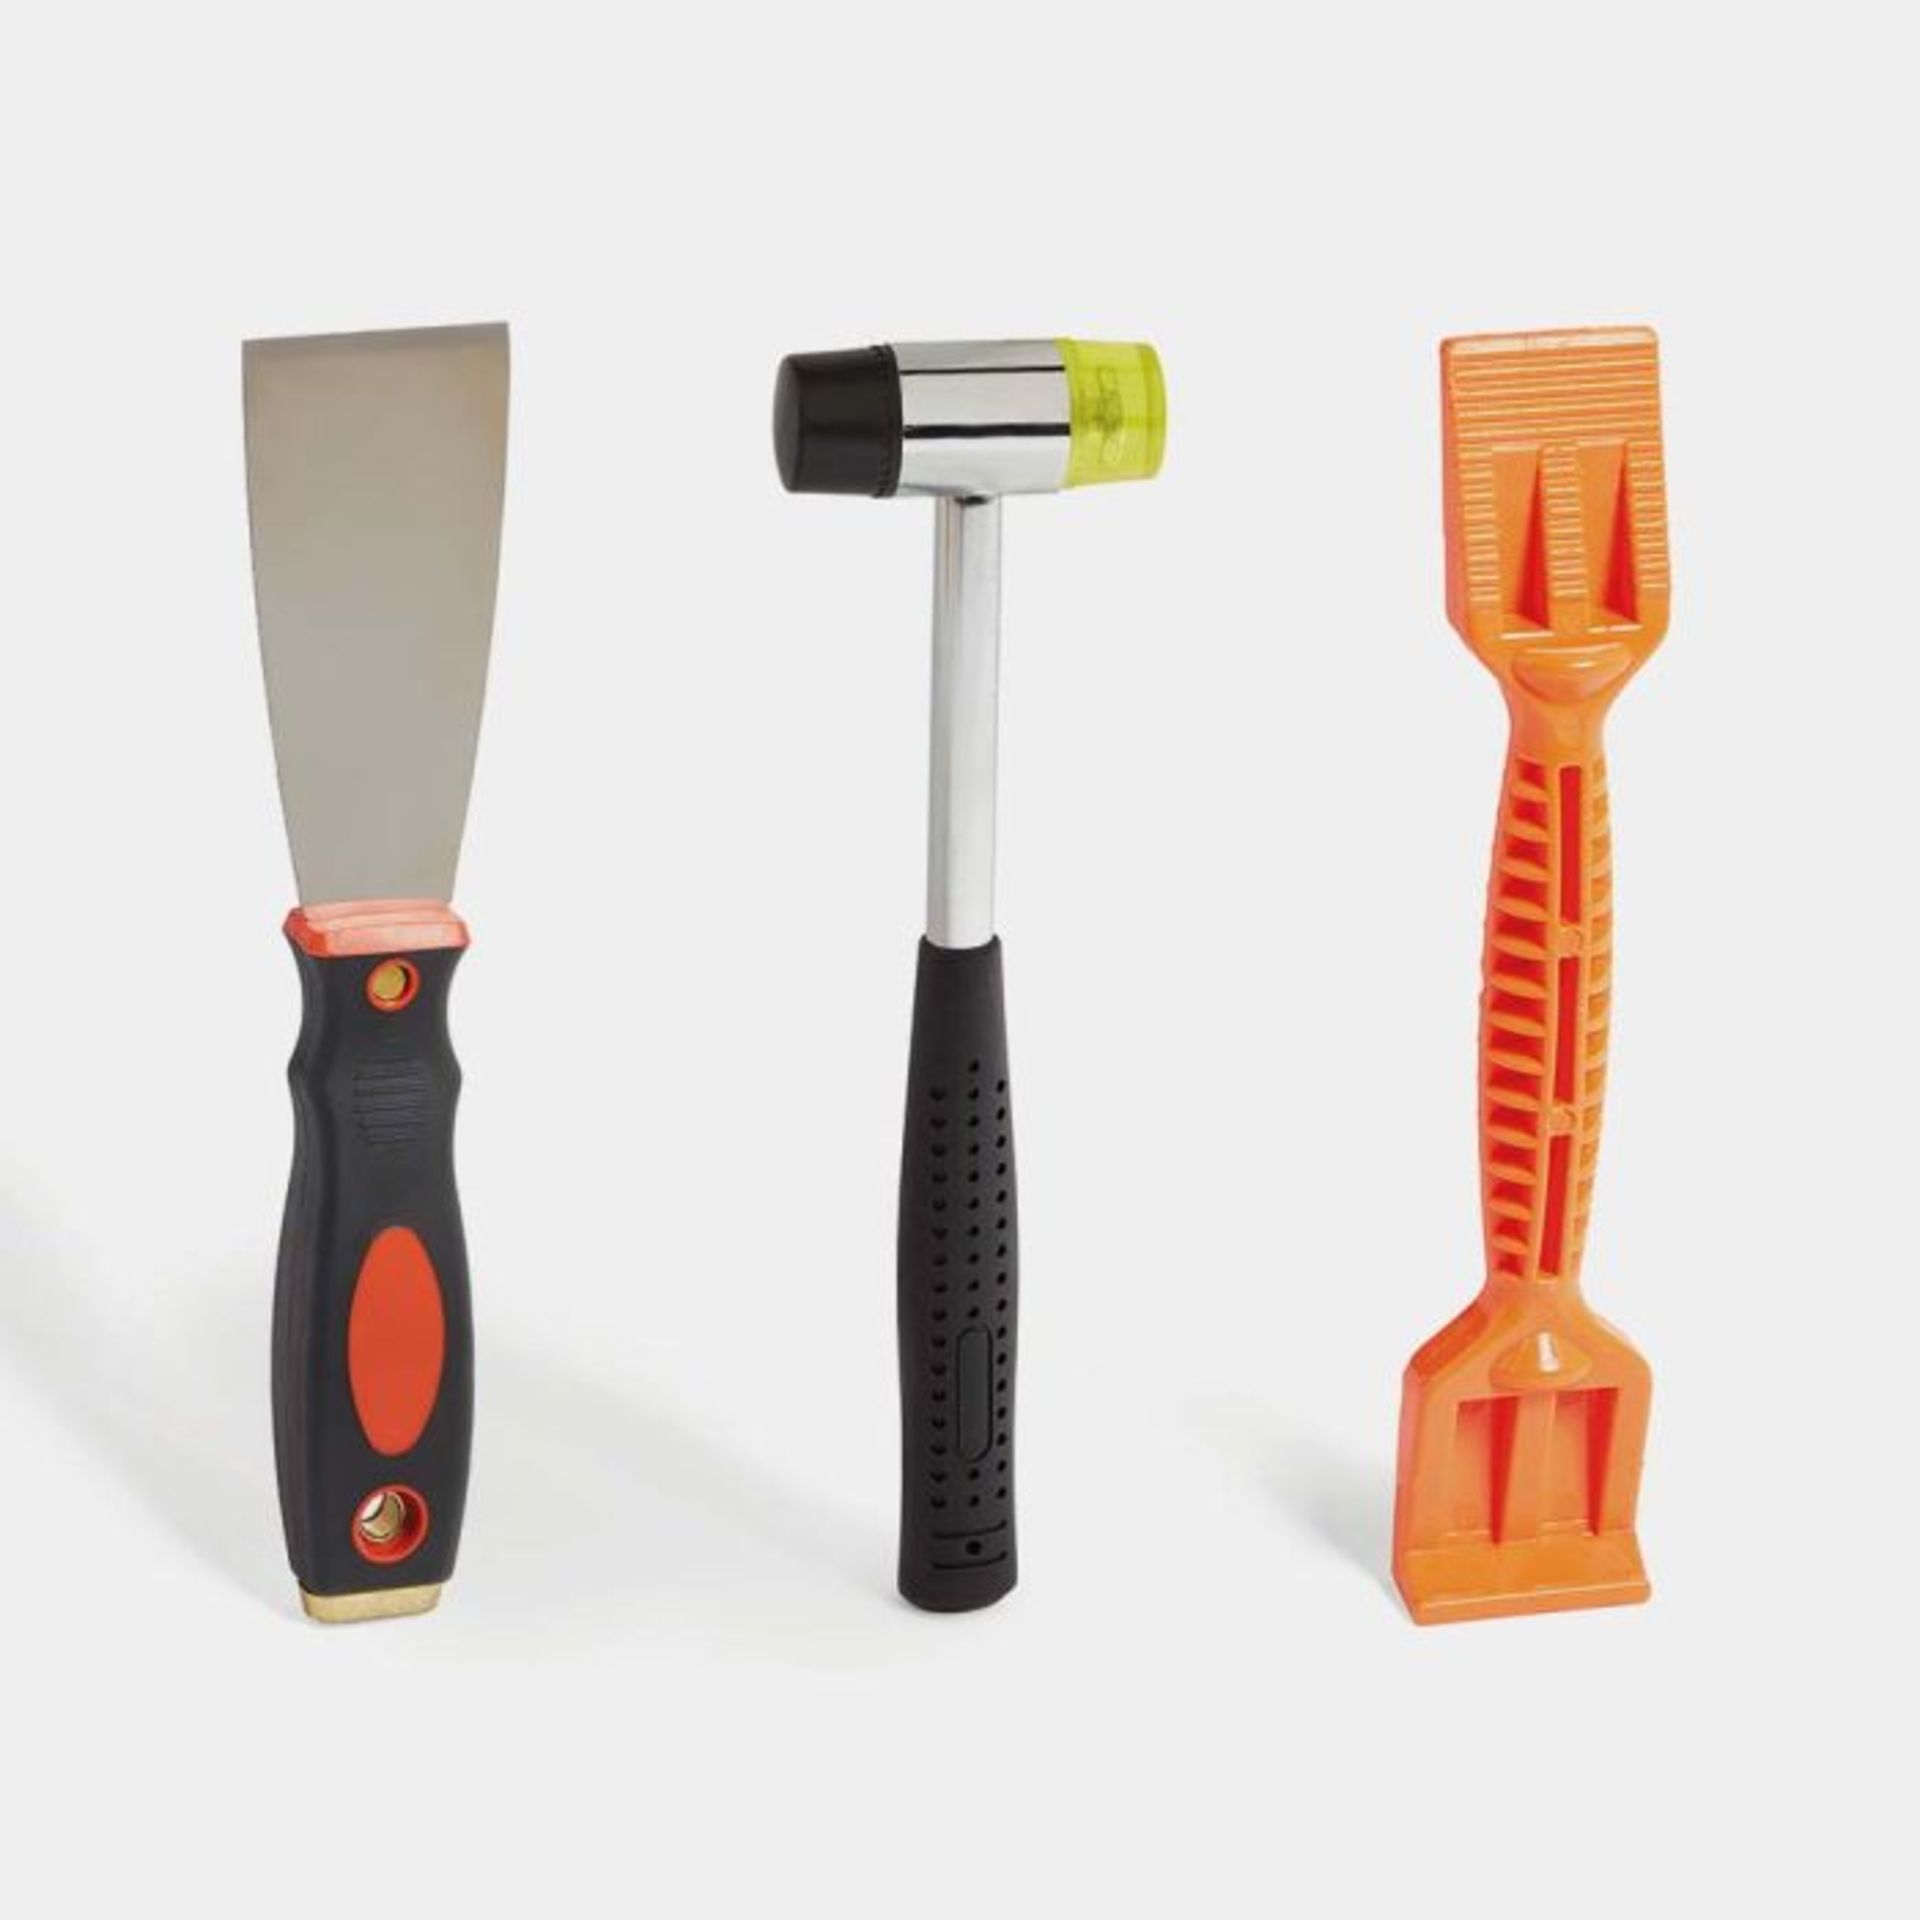 Window Glazing Tool Kit. - PW. Made with high-quality steel, rubber, and polypropylene, have peace